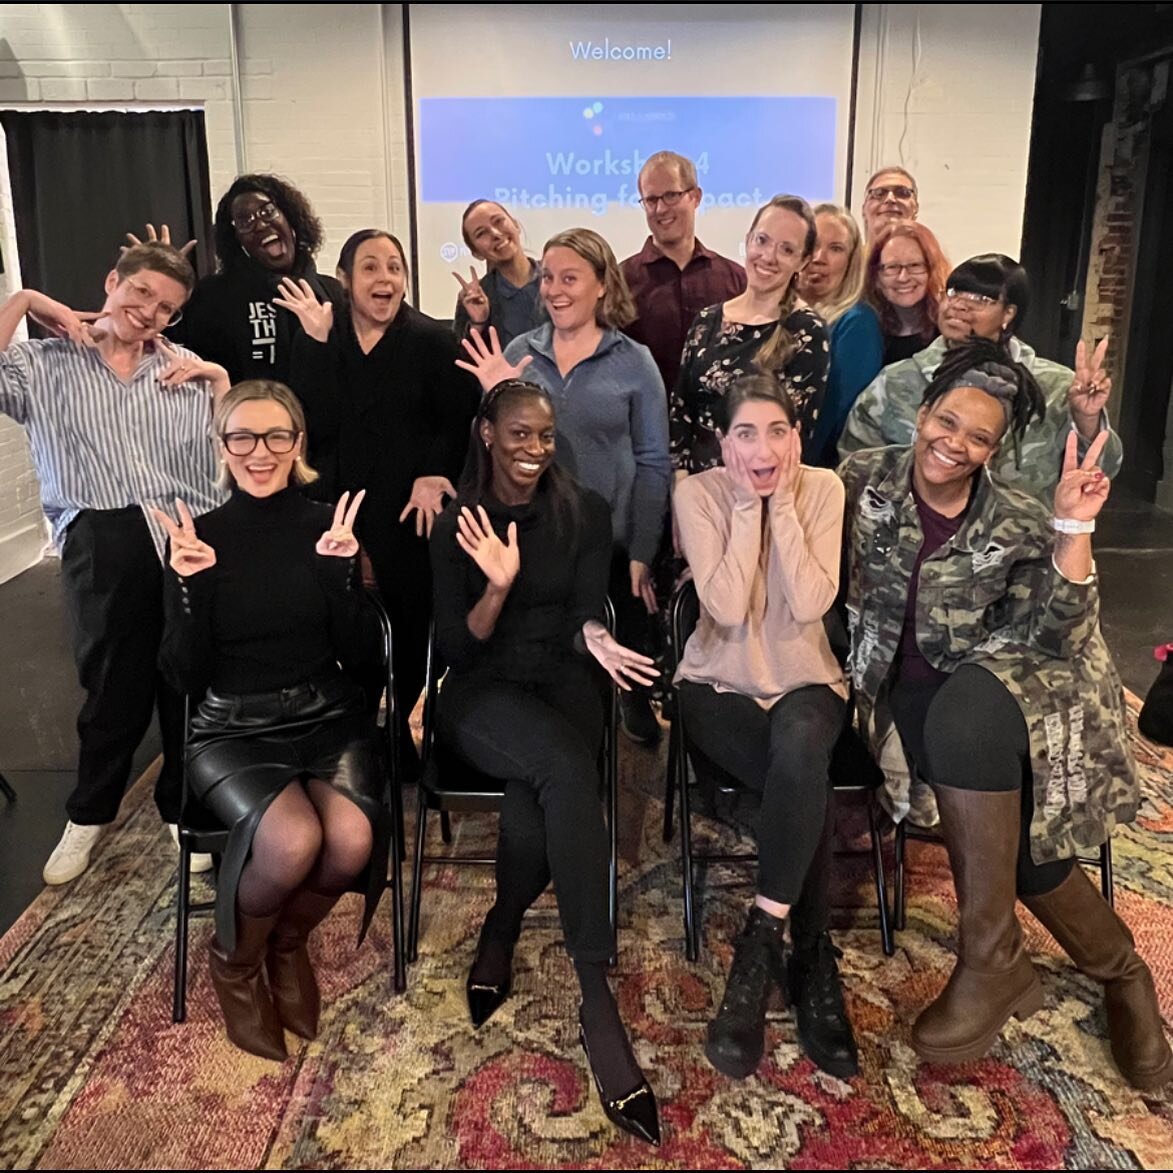 We recently completed our final Full Circle nonprofit leadership accelerator group workshop with @svp_pittsburgh @equity_impact facilitated by @properleigh .

WITPGH has spent over a hundred hours in this work, from early mornings, late nights and en